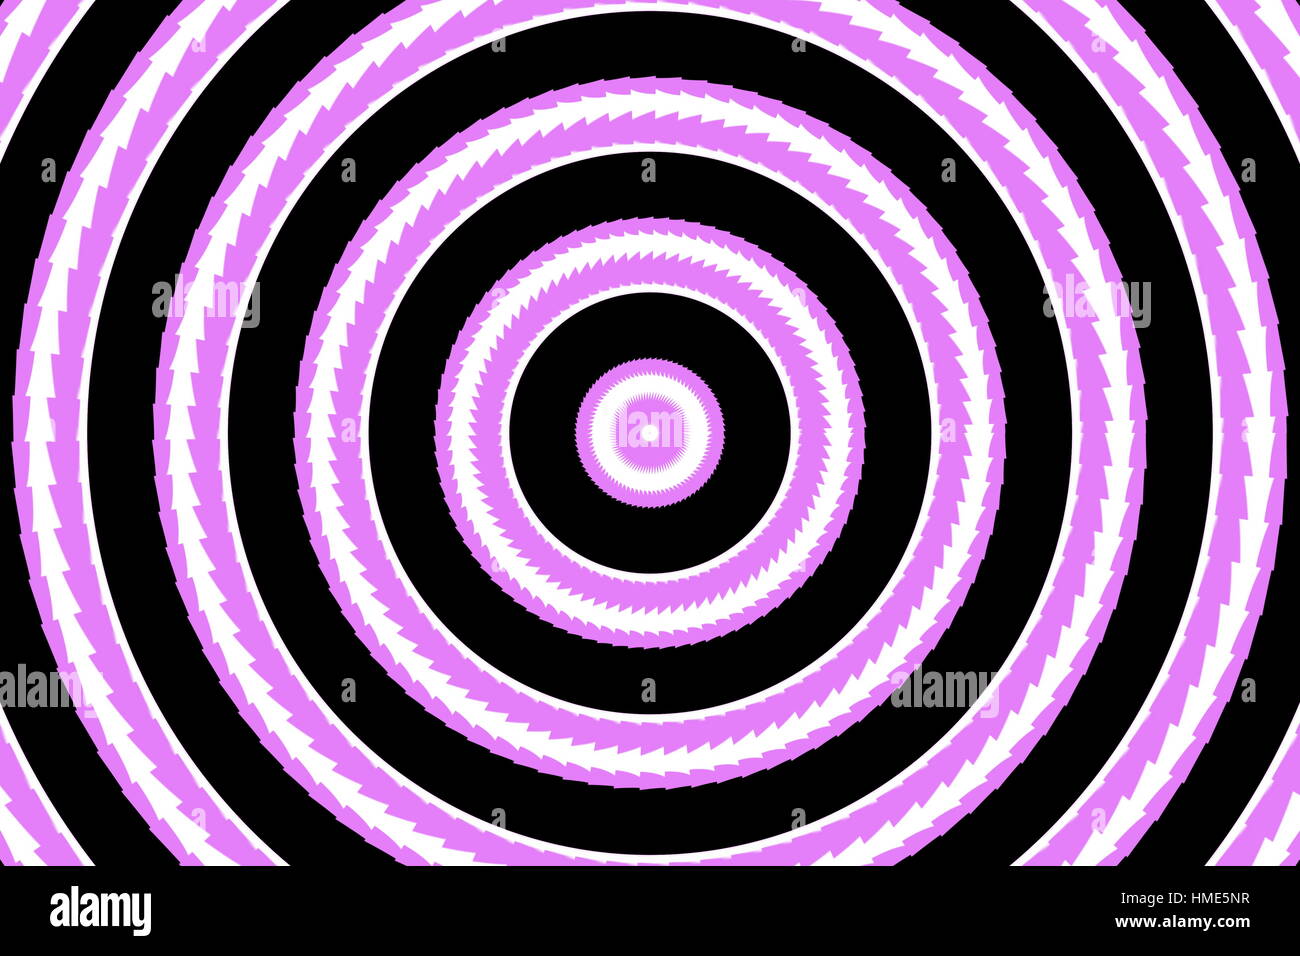 Illustration of concentric circles Stock Photo